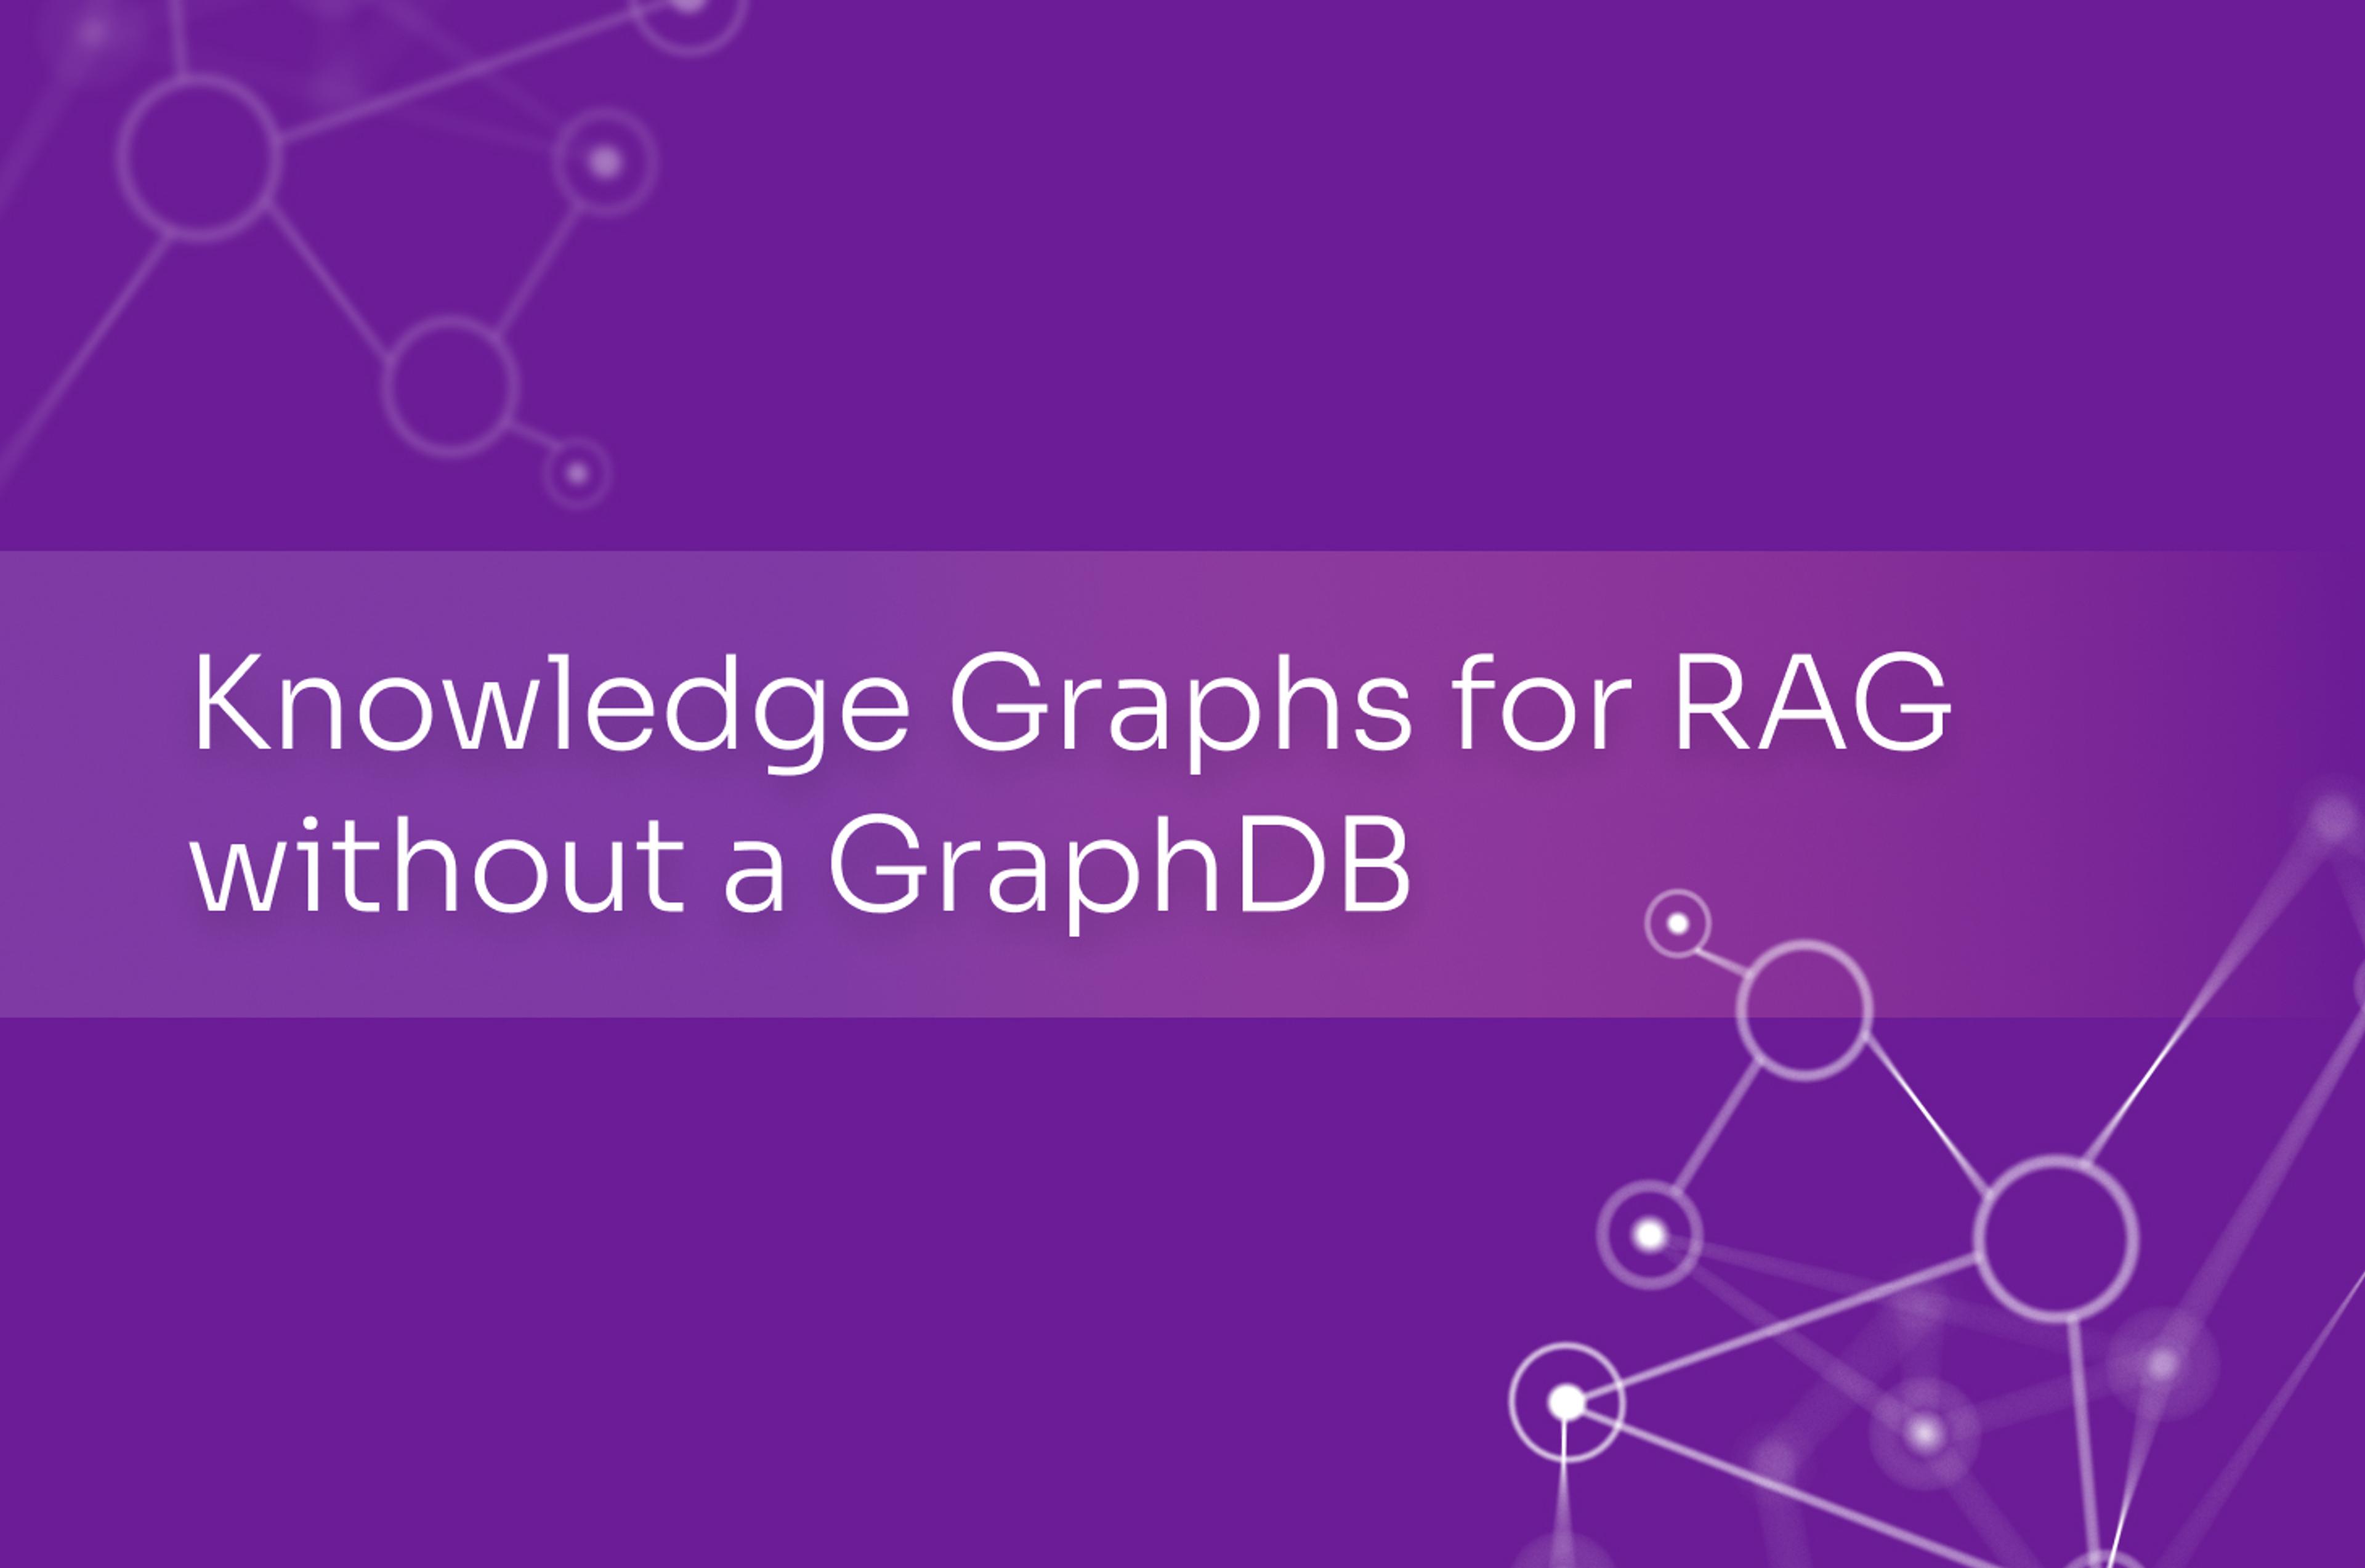 Knowledge Graphs for RAG without a GraphDB